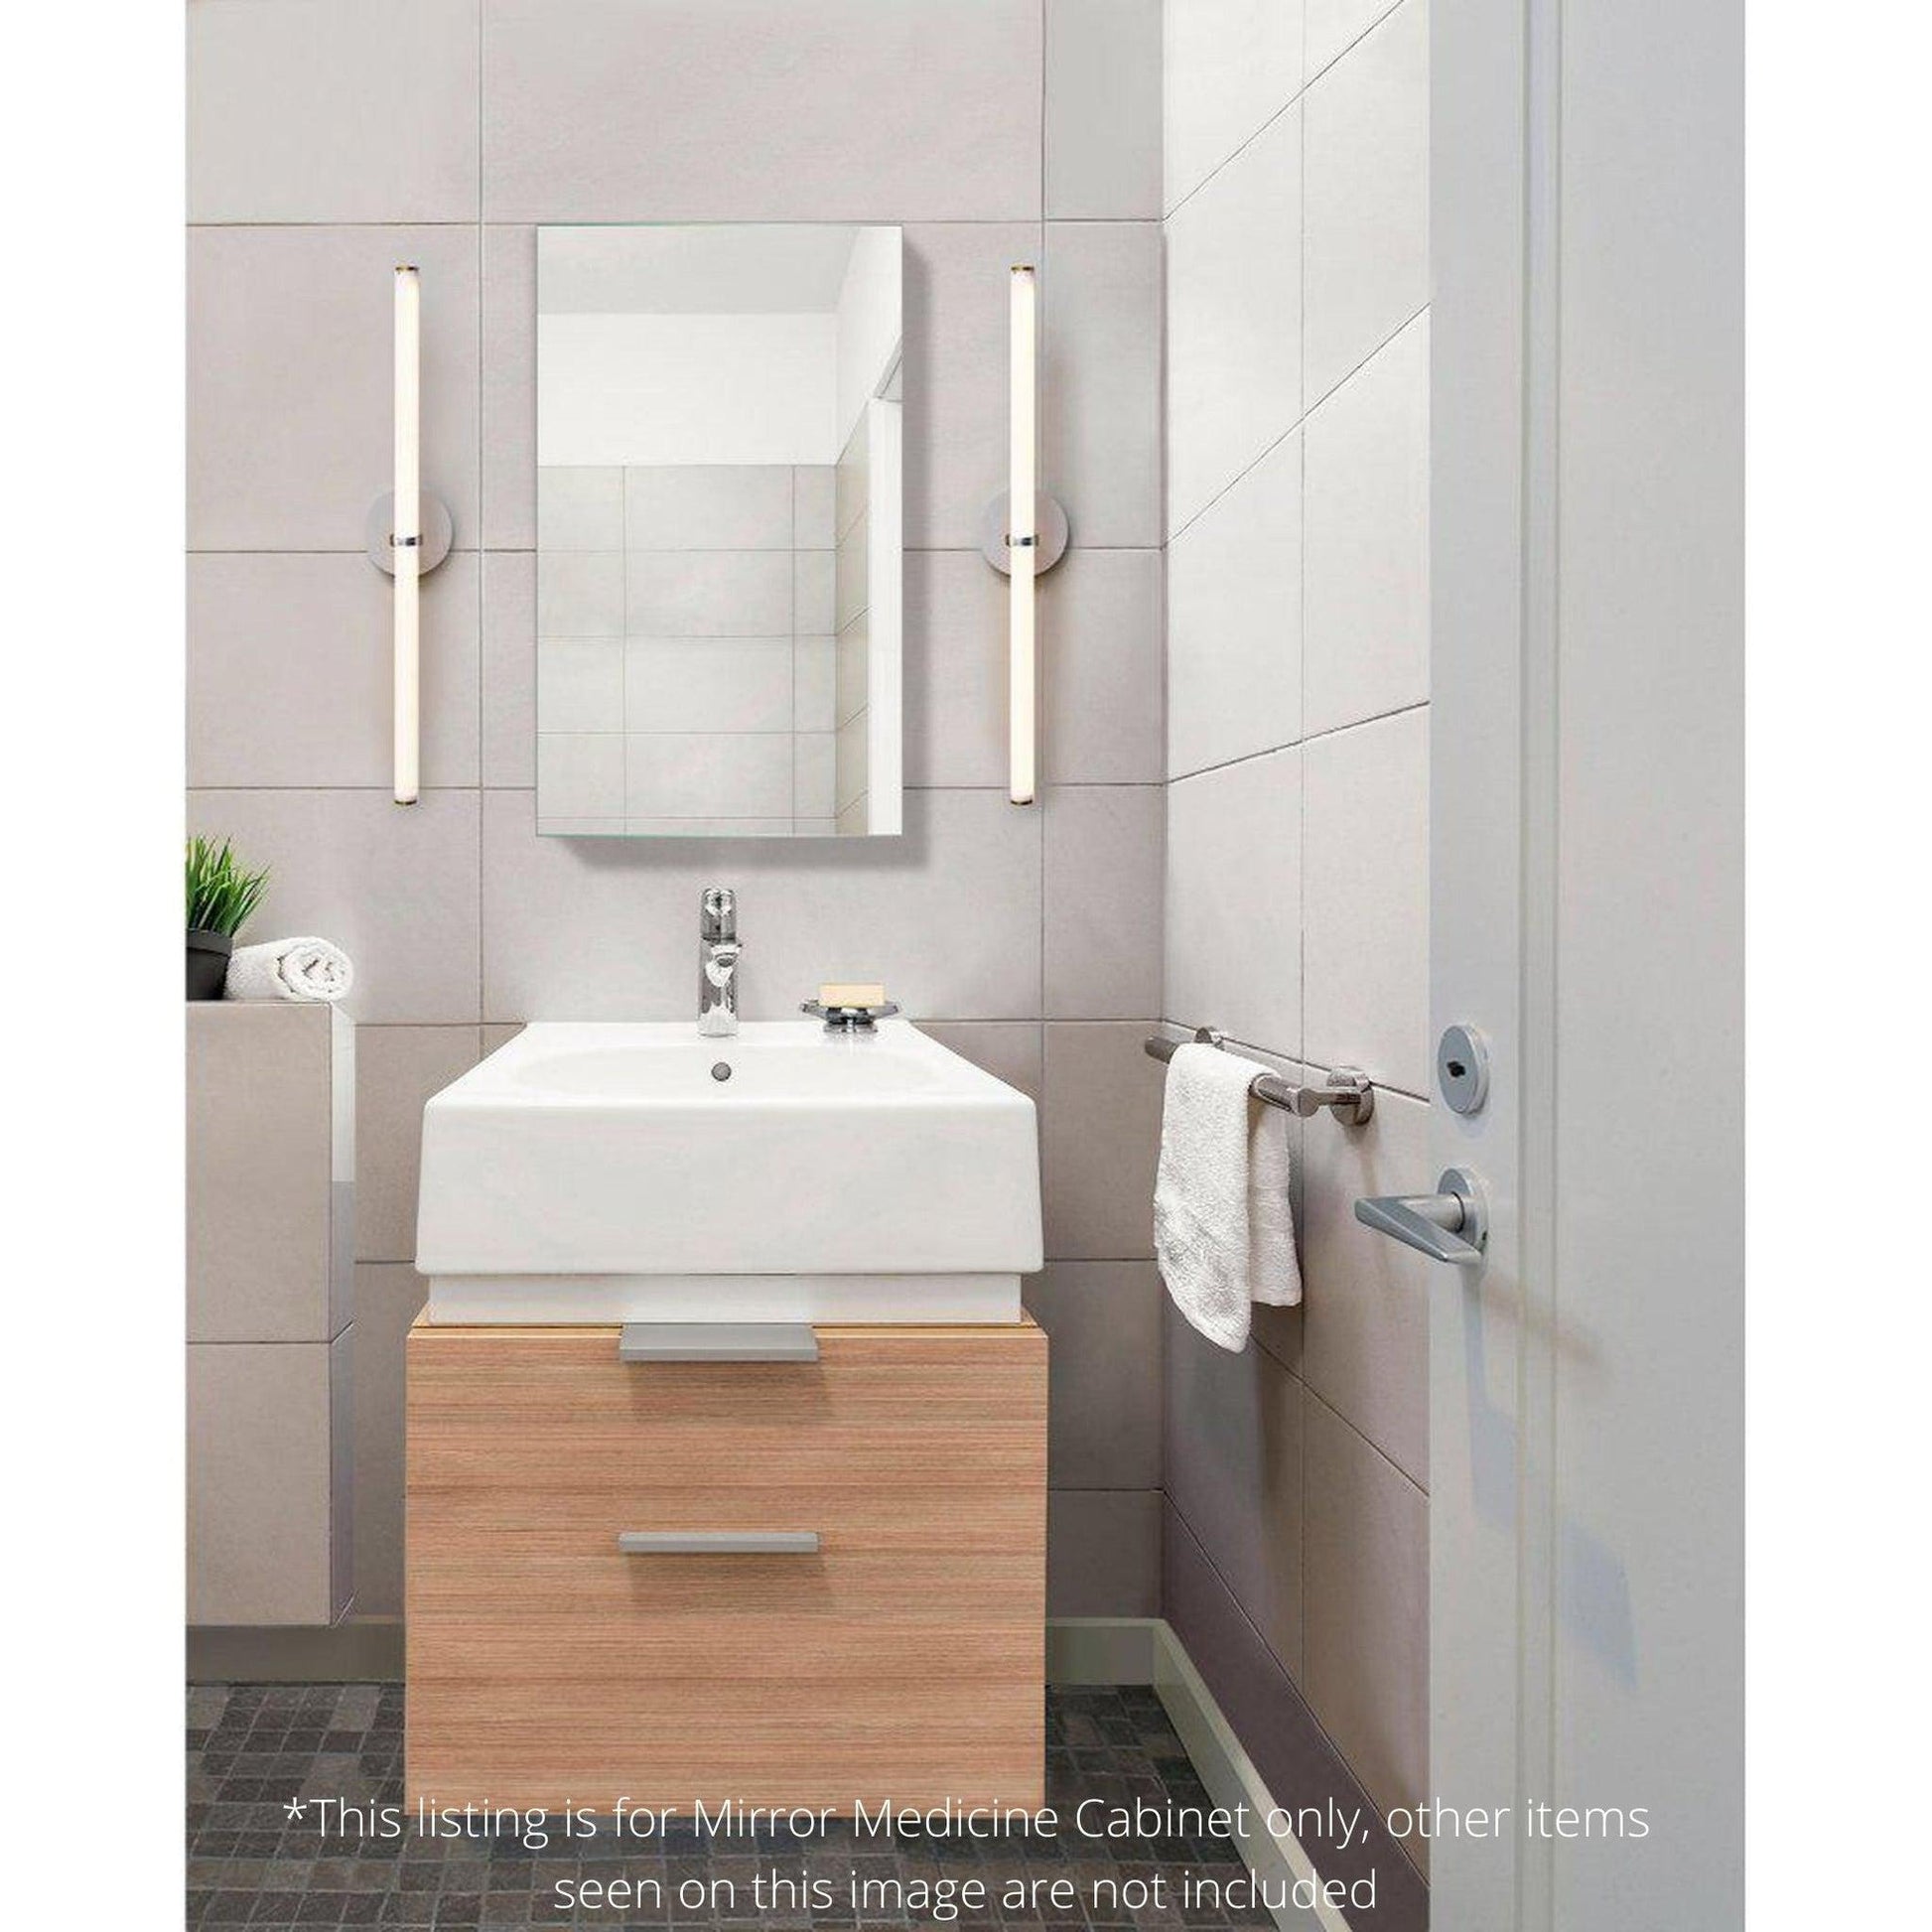 Krugg Reflections Plaza 18" x 30" Single Left Opening Rectangular Recessed/Surface-Mount Medicine Cabinet Mirror With Three Adjustable Shelves